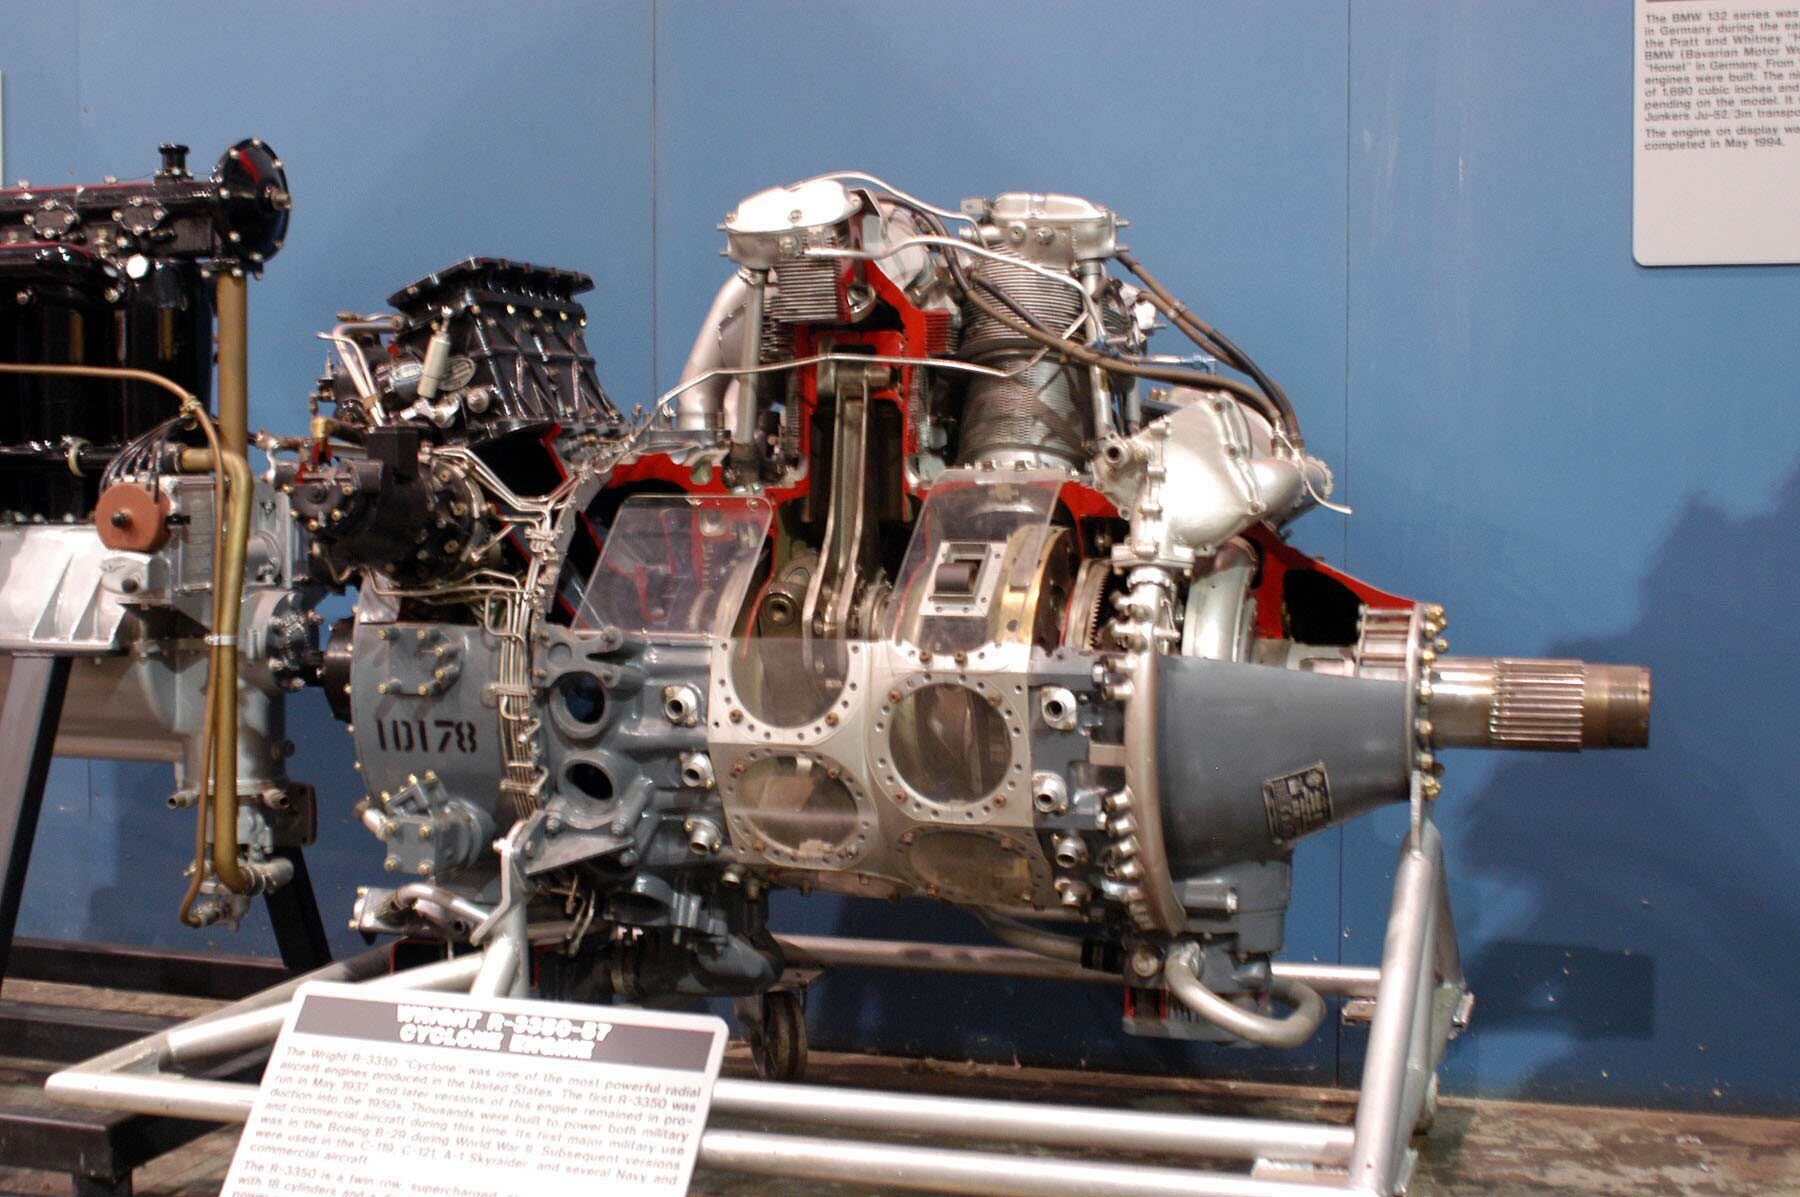 A Wright R-3350 engine on display. Many believe the engines easily caught fire because the crankcase was magnesium—not so. Incorrect info has propagated throughout the internet.